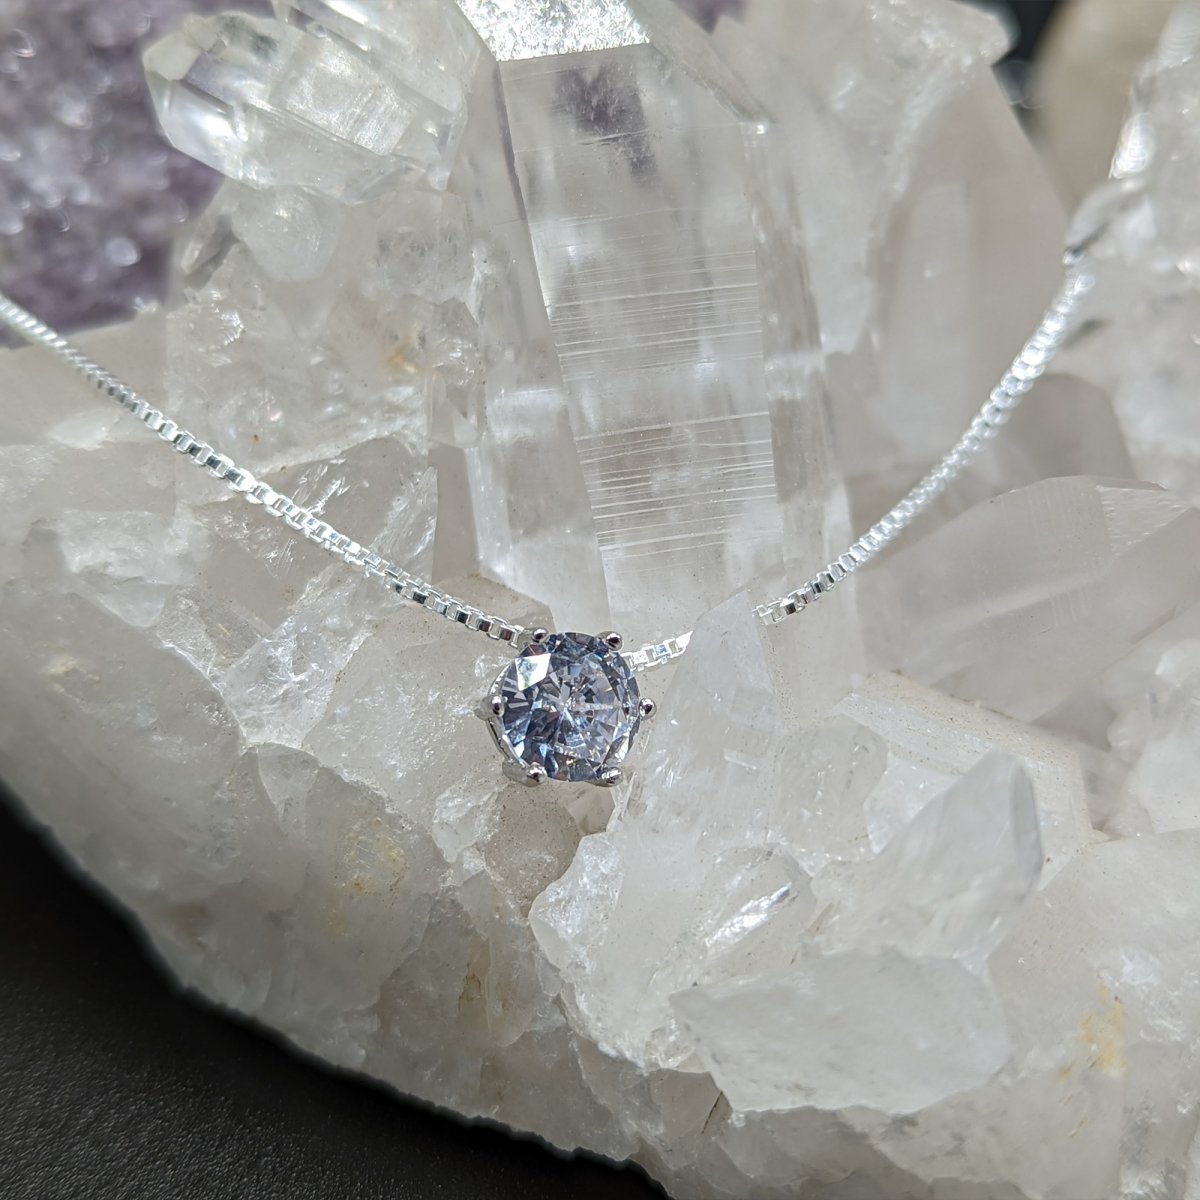 Cystic Fibrosis Support Gift, Silver CZ Necklace - Meaningful Cards